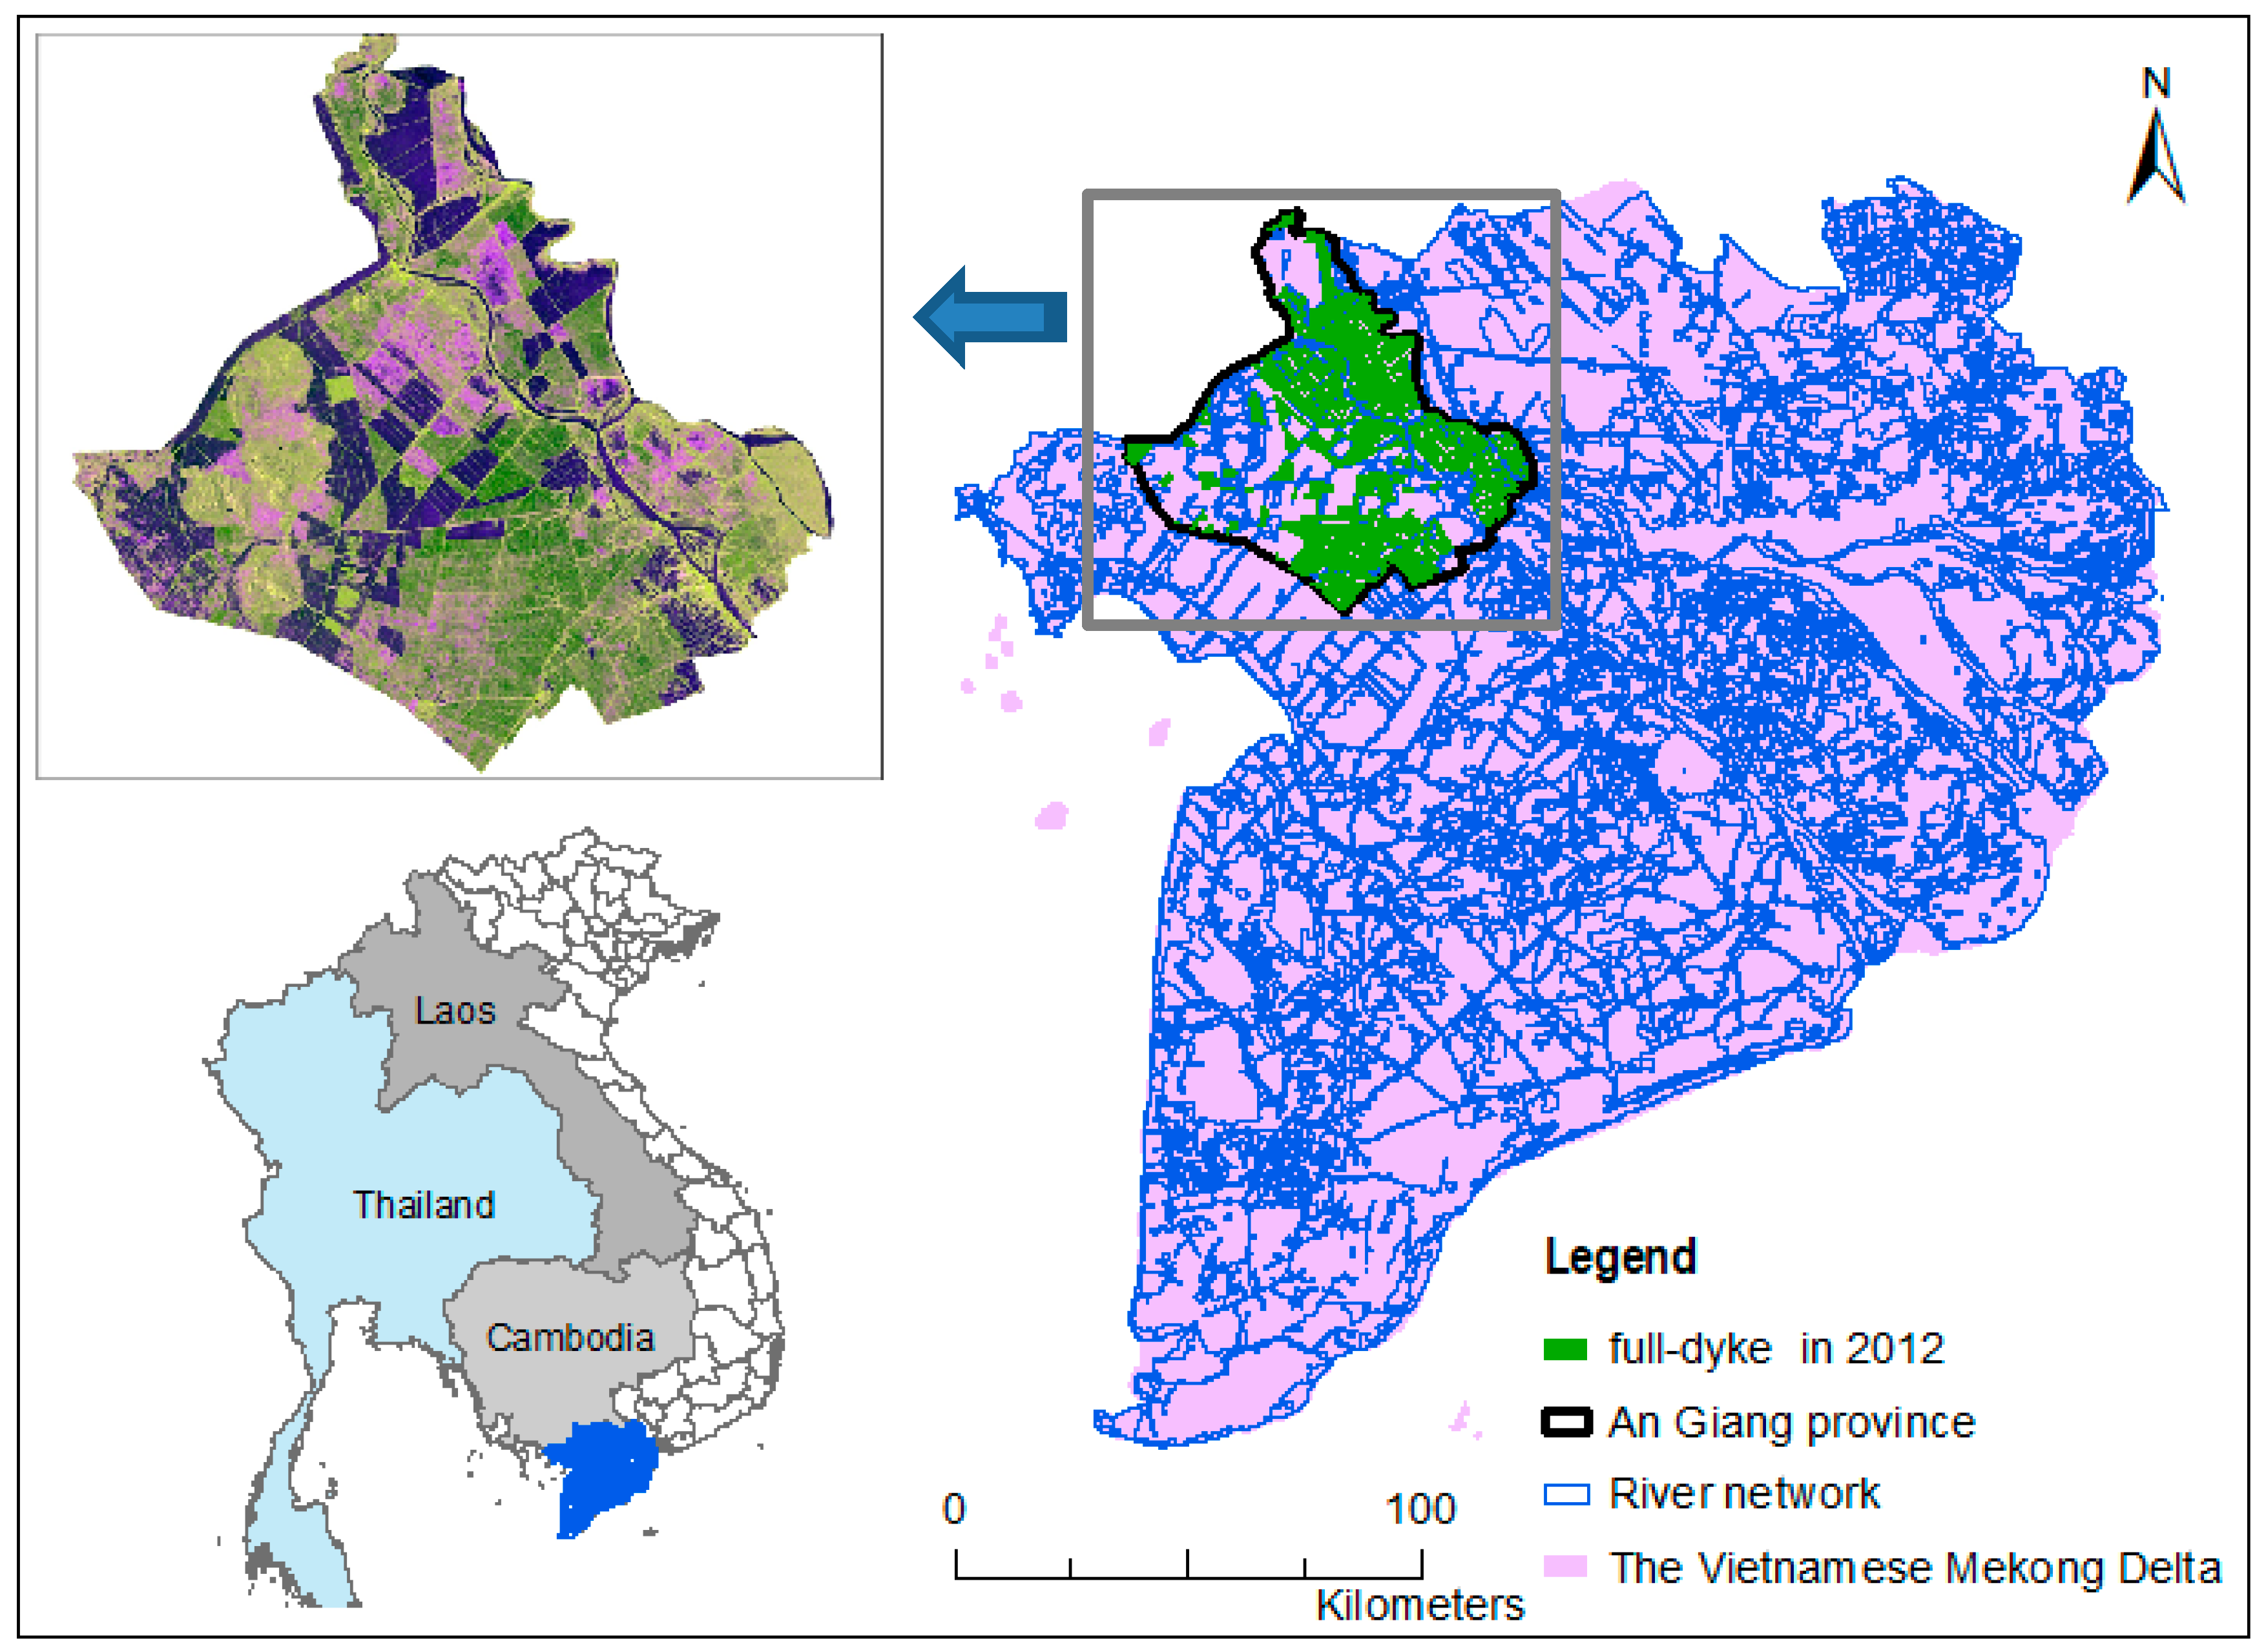 Ijgi Free Full Text Monitoring And Mapping Of Rice Cropping Pattern In Flooding Area In The Vietnamese Mekong Delta Using Sentinel 1a Data A Case Of An Giang Province Html